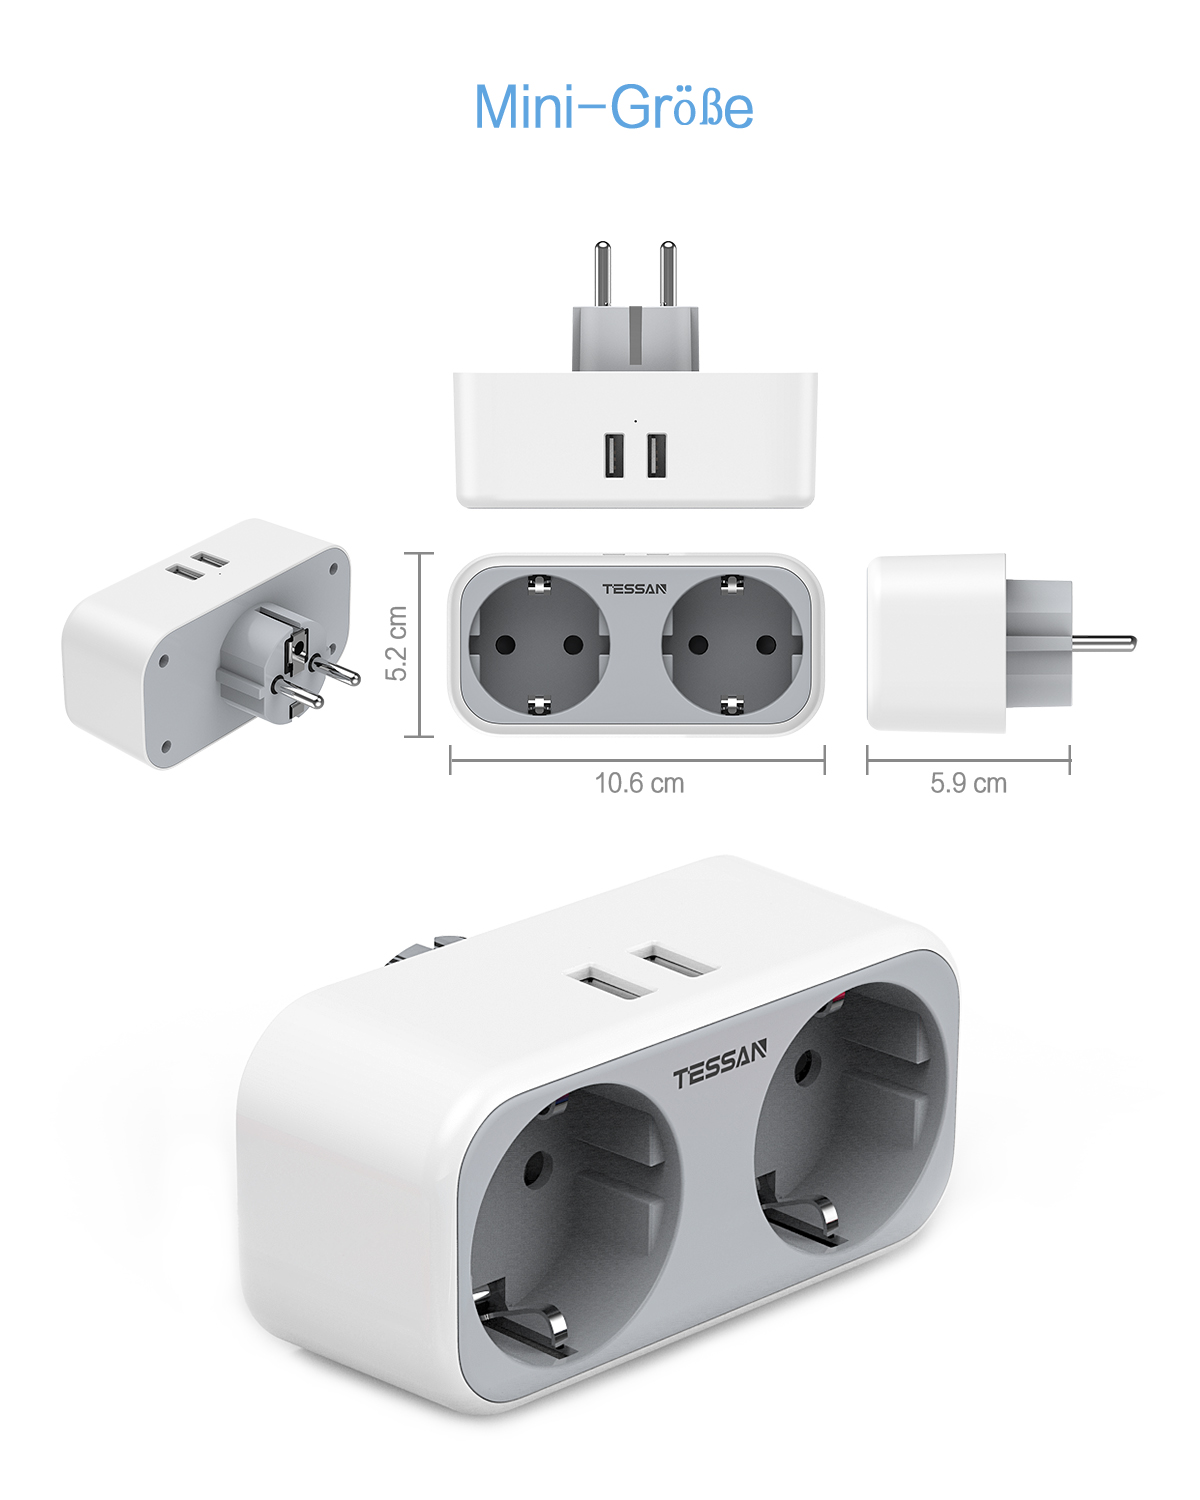 TESSAN-TS-321-DE-3600W-4-in-1-EU-Wall-Socket-Extender-with-2-AC-Outlets2-USB-Ports-Travel-Power-Adap-1824429-6